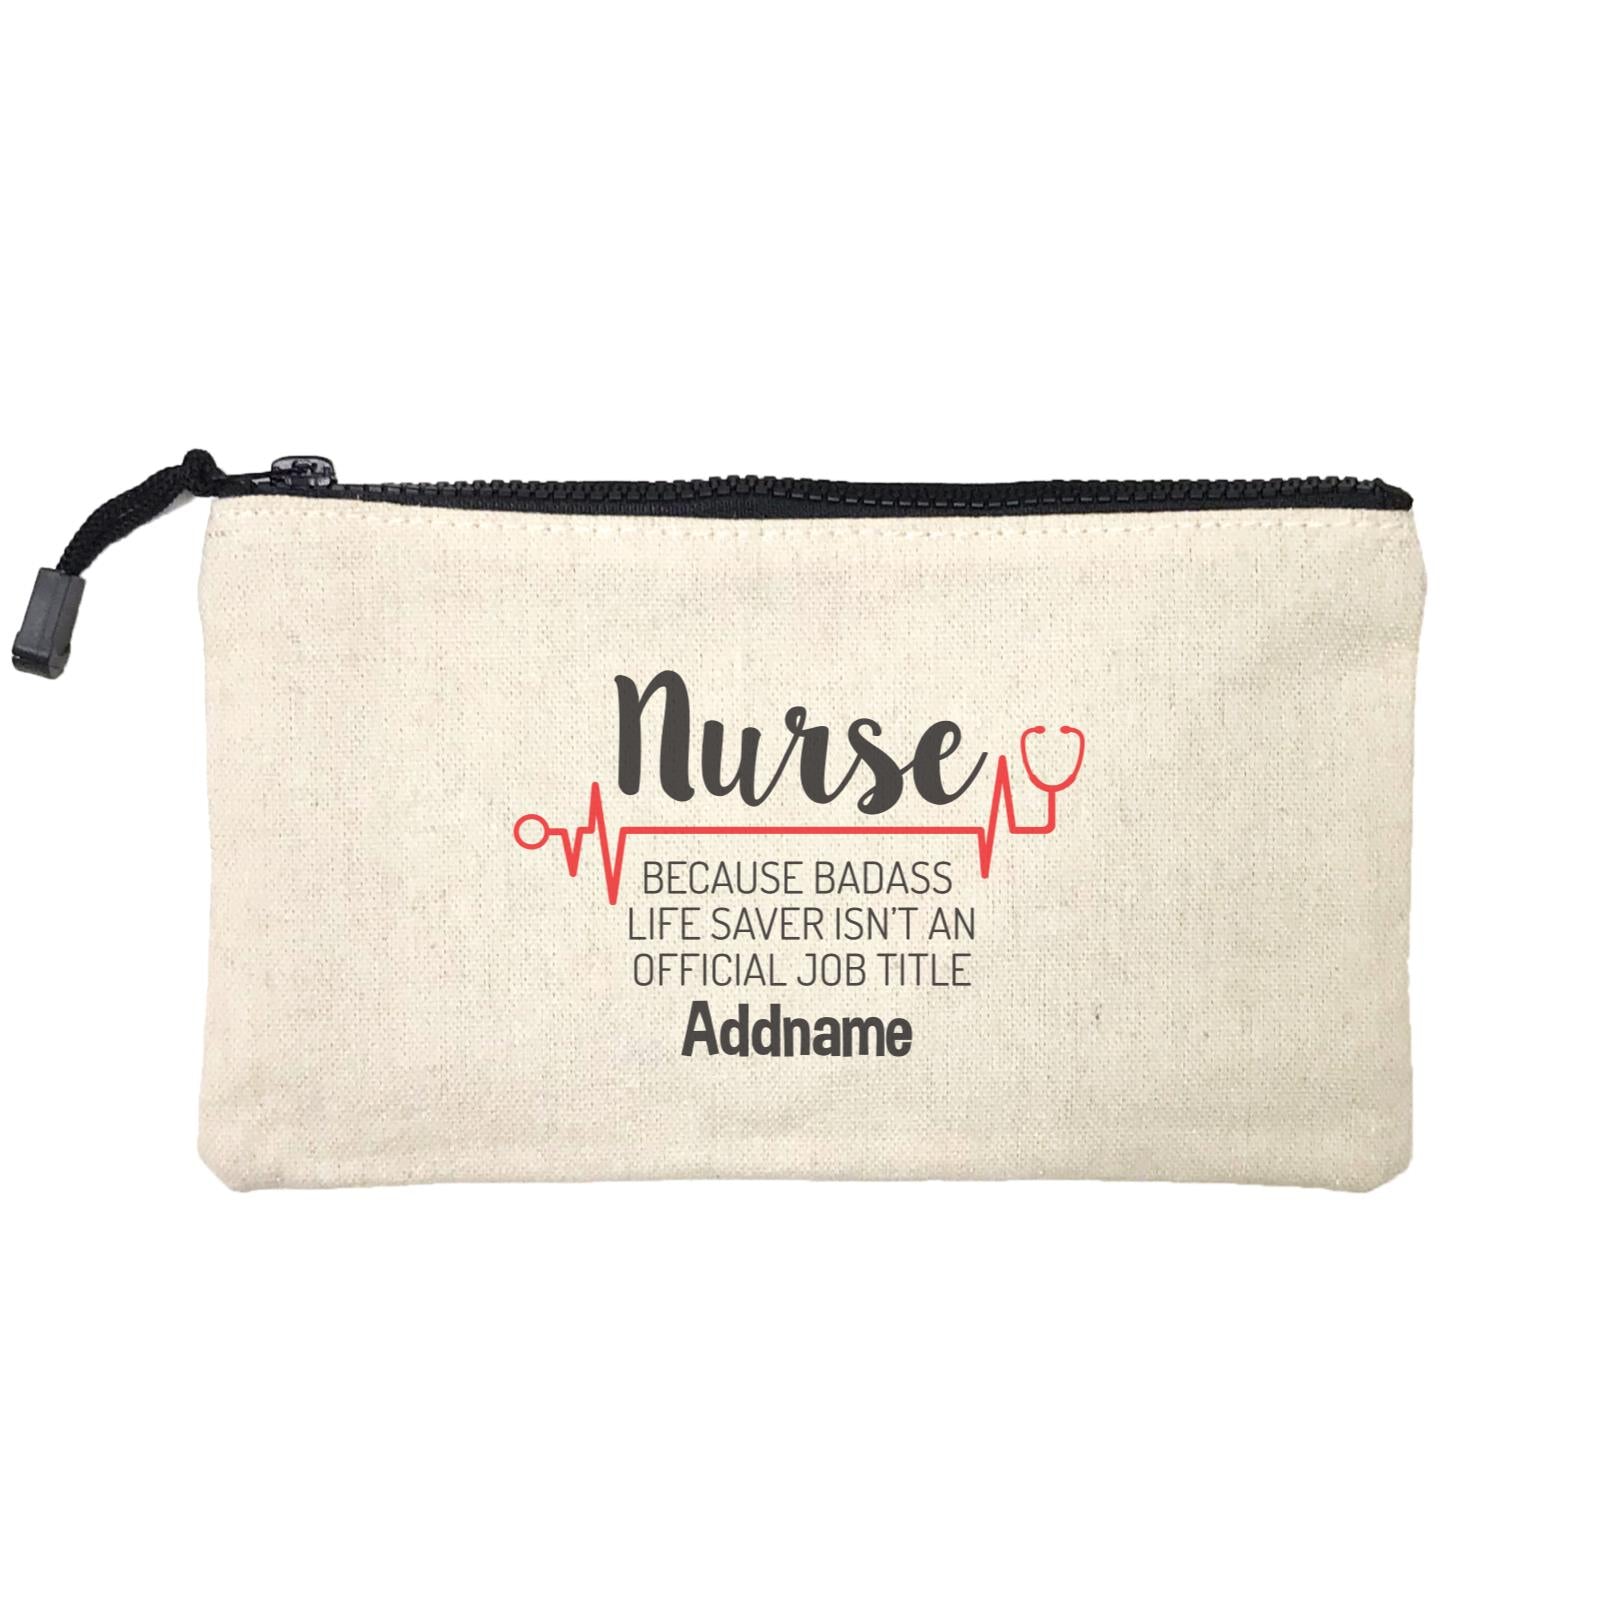 Nurse, Because Badass Life Saver Isn't An Official Job Title Mini Accessories Stationery Pouch